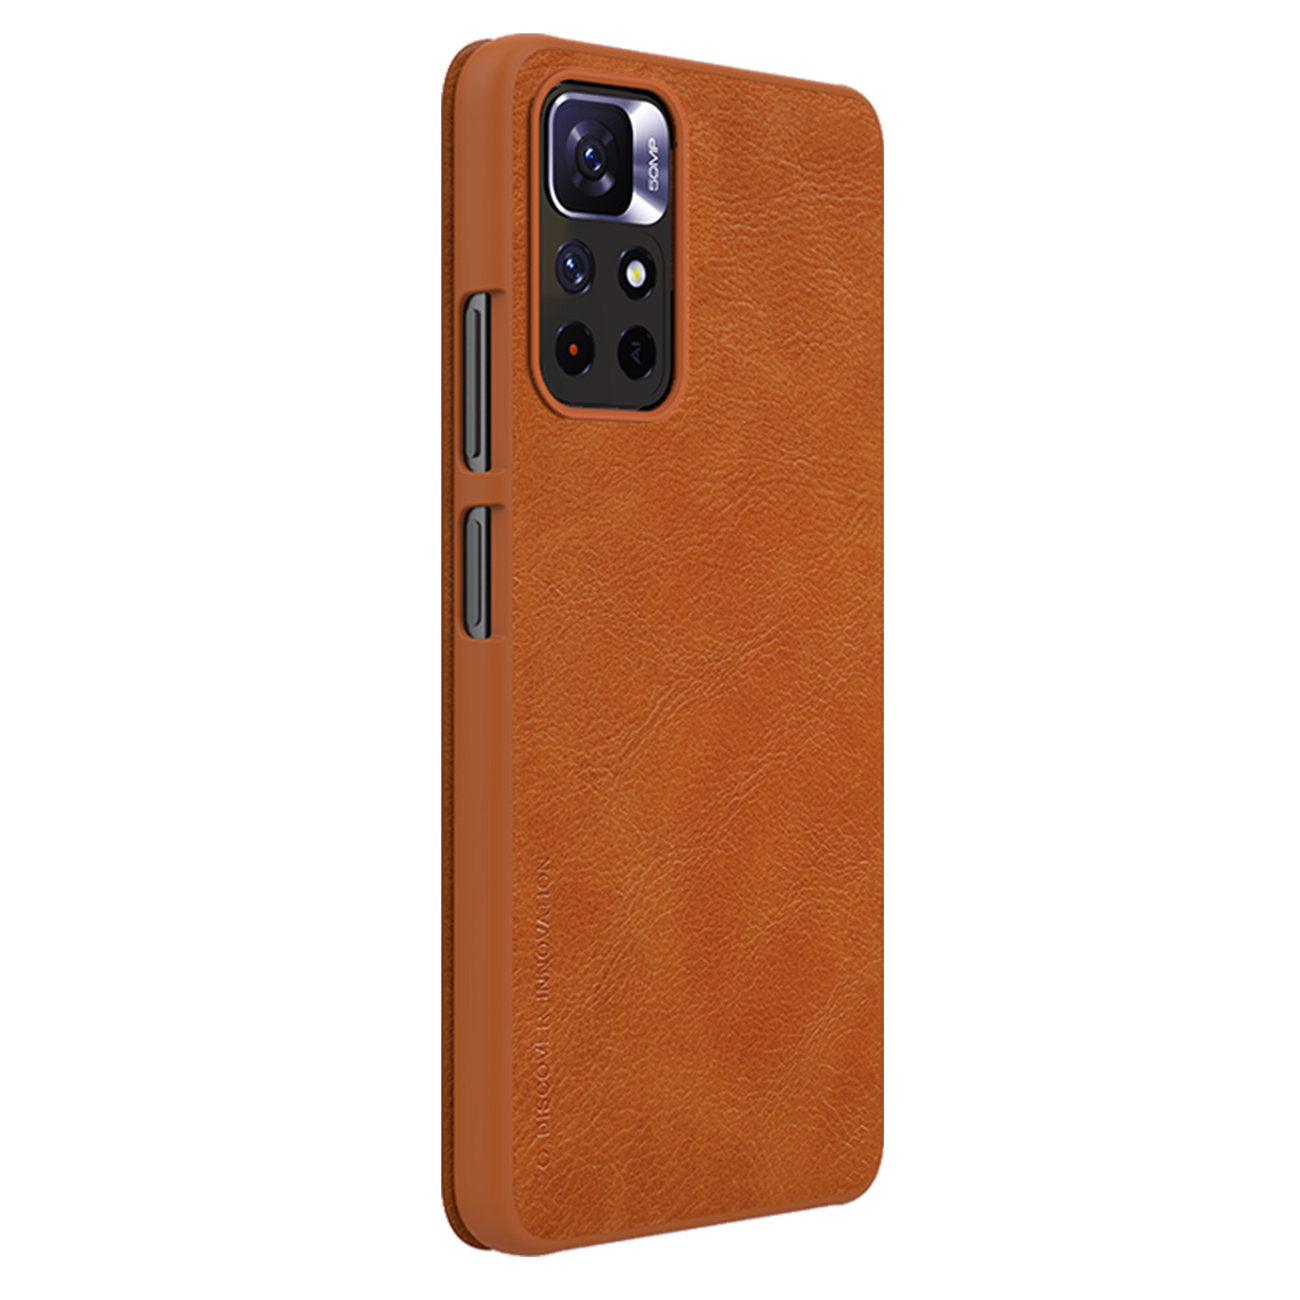 Nillkin Qin Case Case for Xiaomi Redmi Note 11T 5G / Note 11S 5G / Note 11 5G (China) / Poco M4 Pro 5G Camera Protector Holster Cover Flip Cover Brown